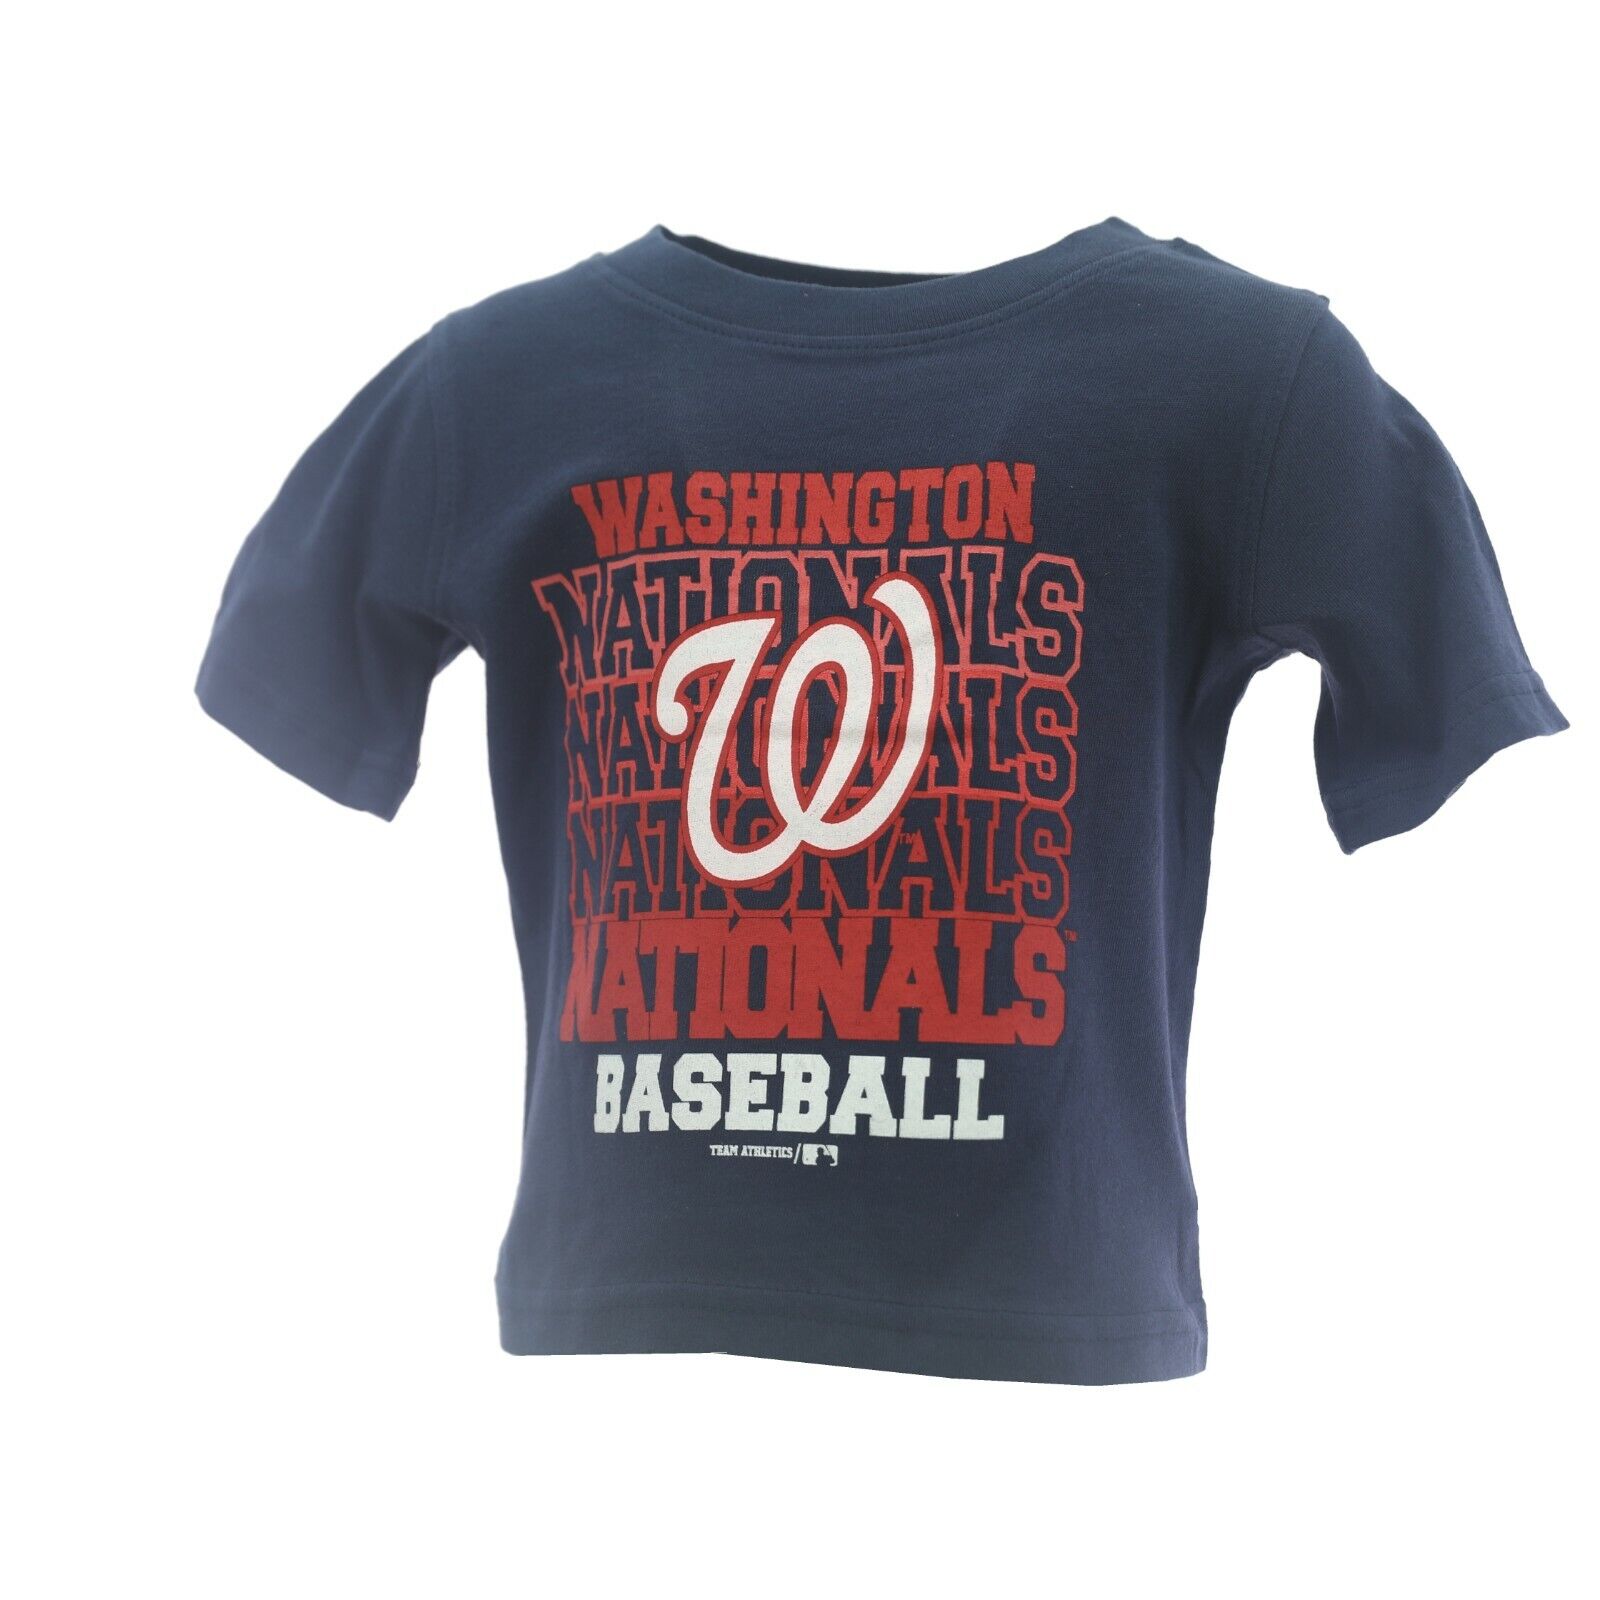 Washington Nationals Official MLB Apparel Baby Infant & Toddler Size  T-Shirt New